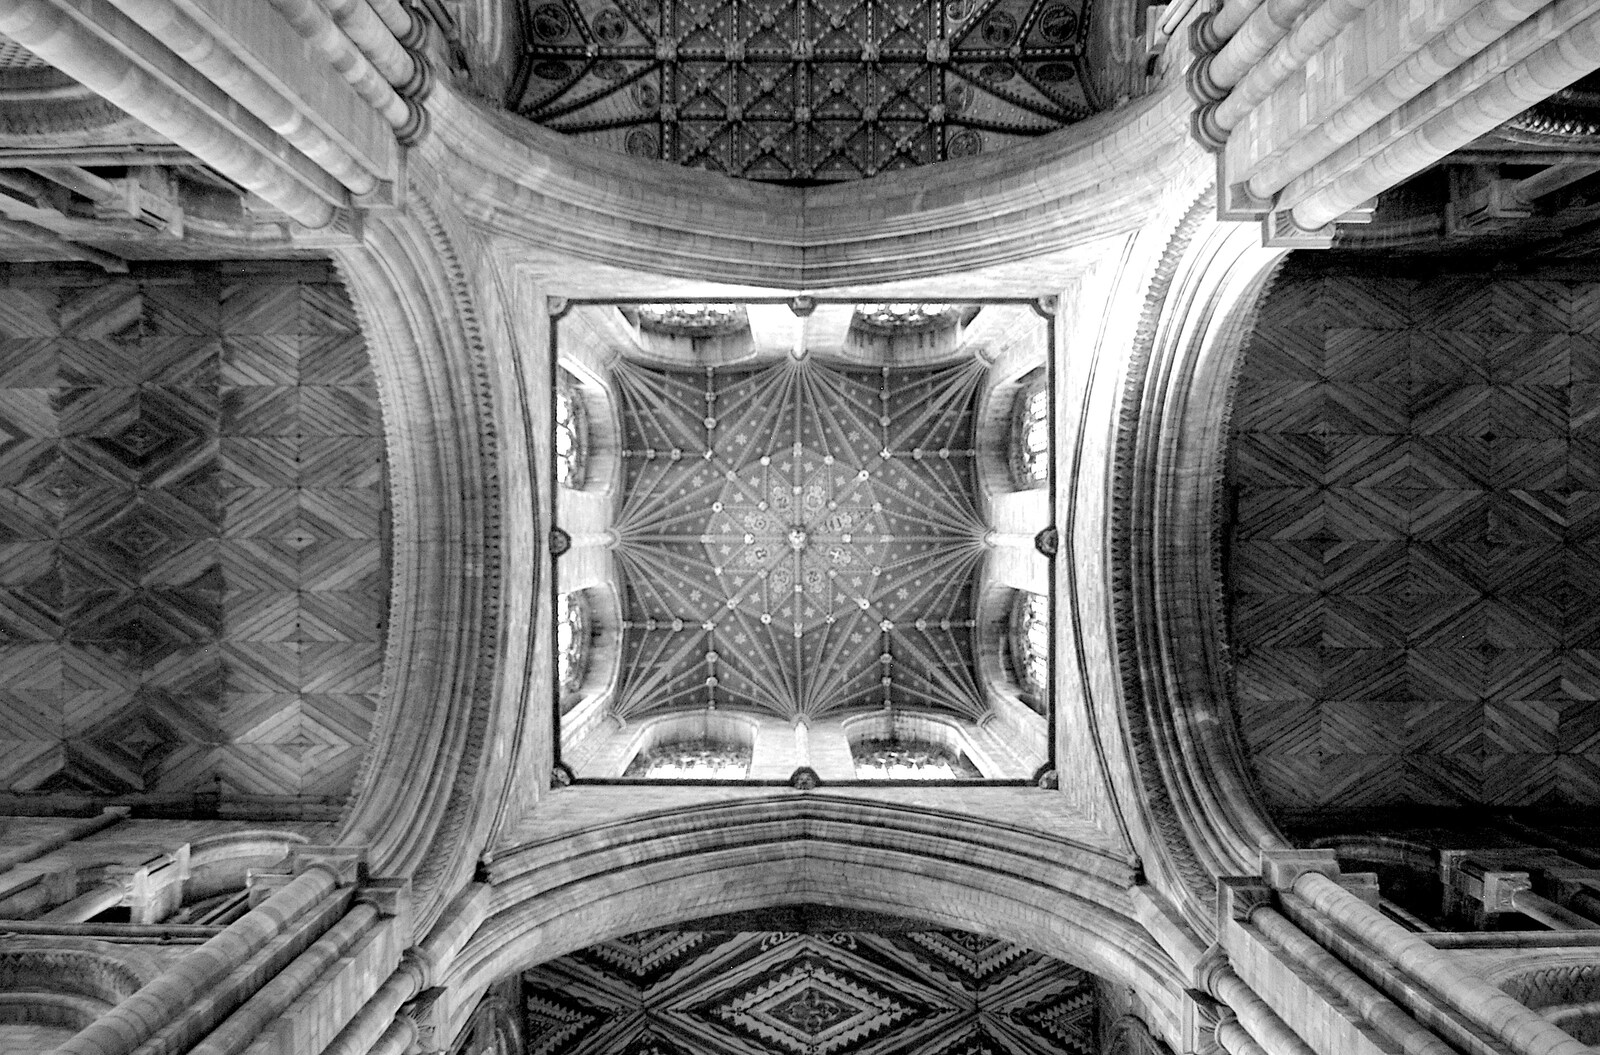 Looking straight up at the central tower from Peterborough Cathedral, Cambridgeshire - 7th September 2005